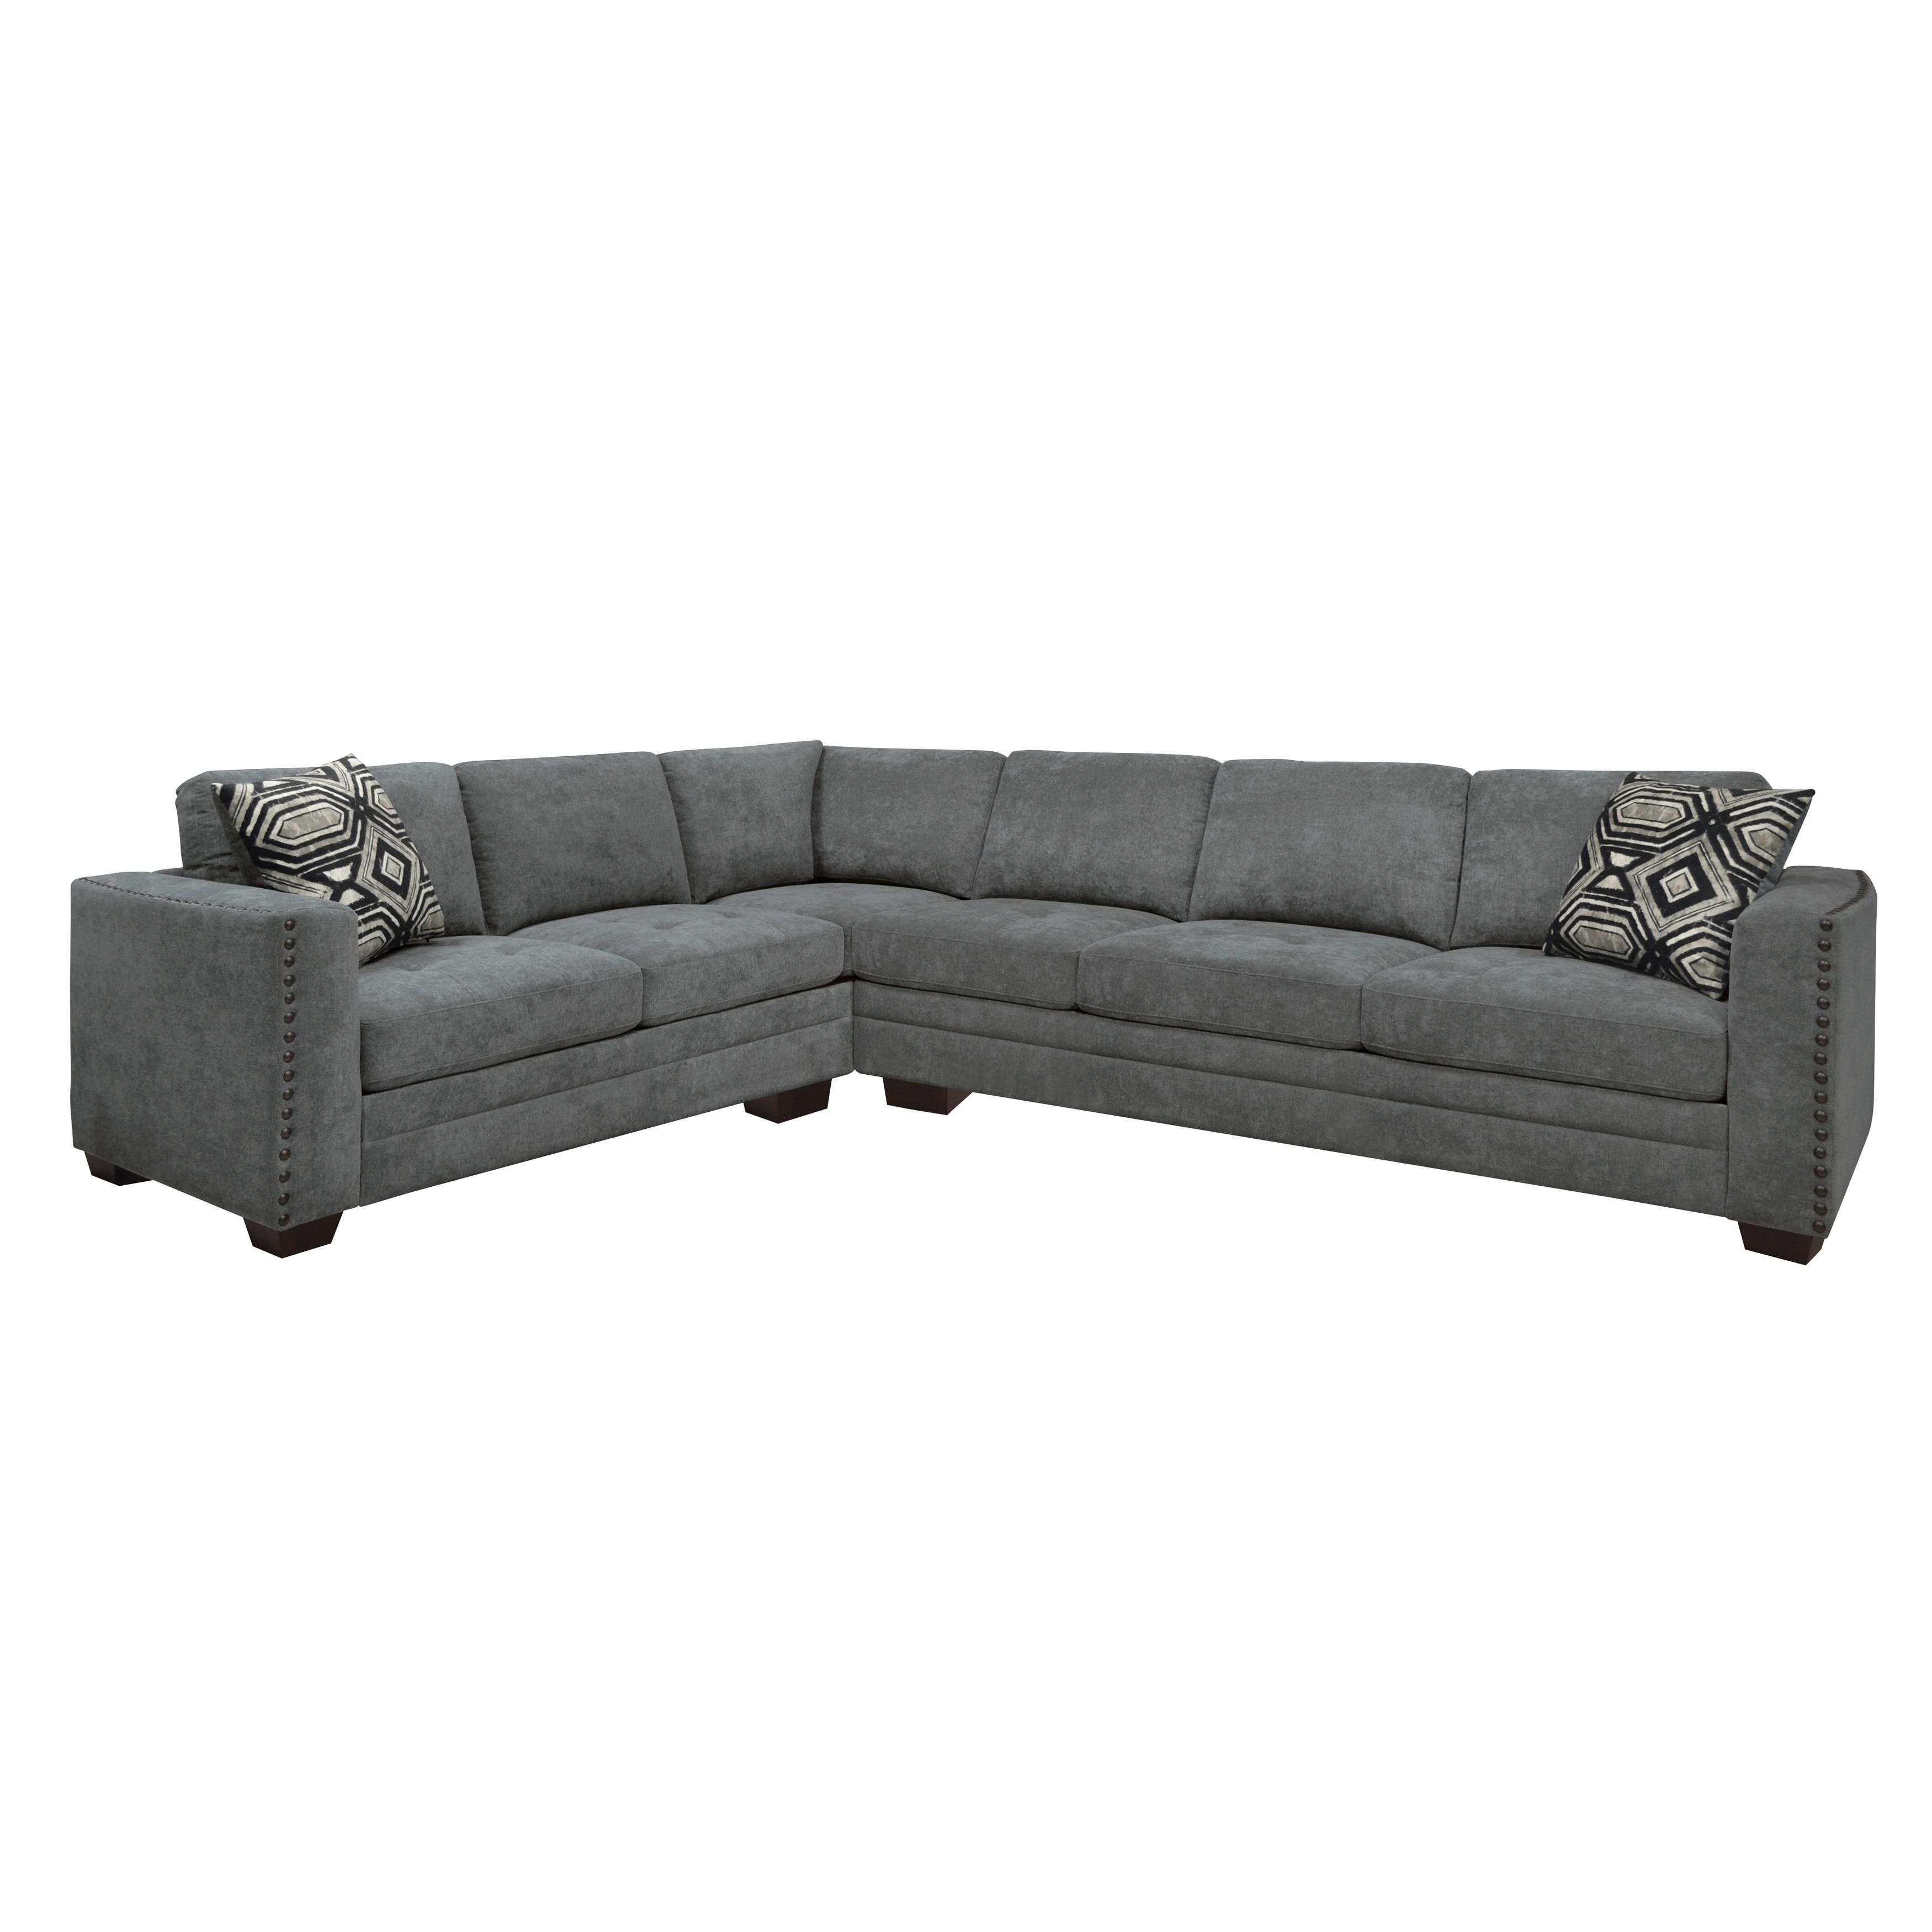 Transitional Sectional 9212GRY*23L3R Sidney 9212GRY*23L3R in Gray 